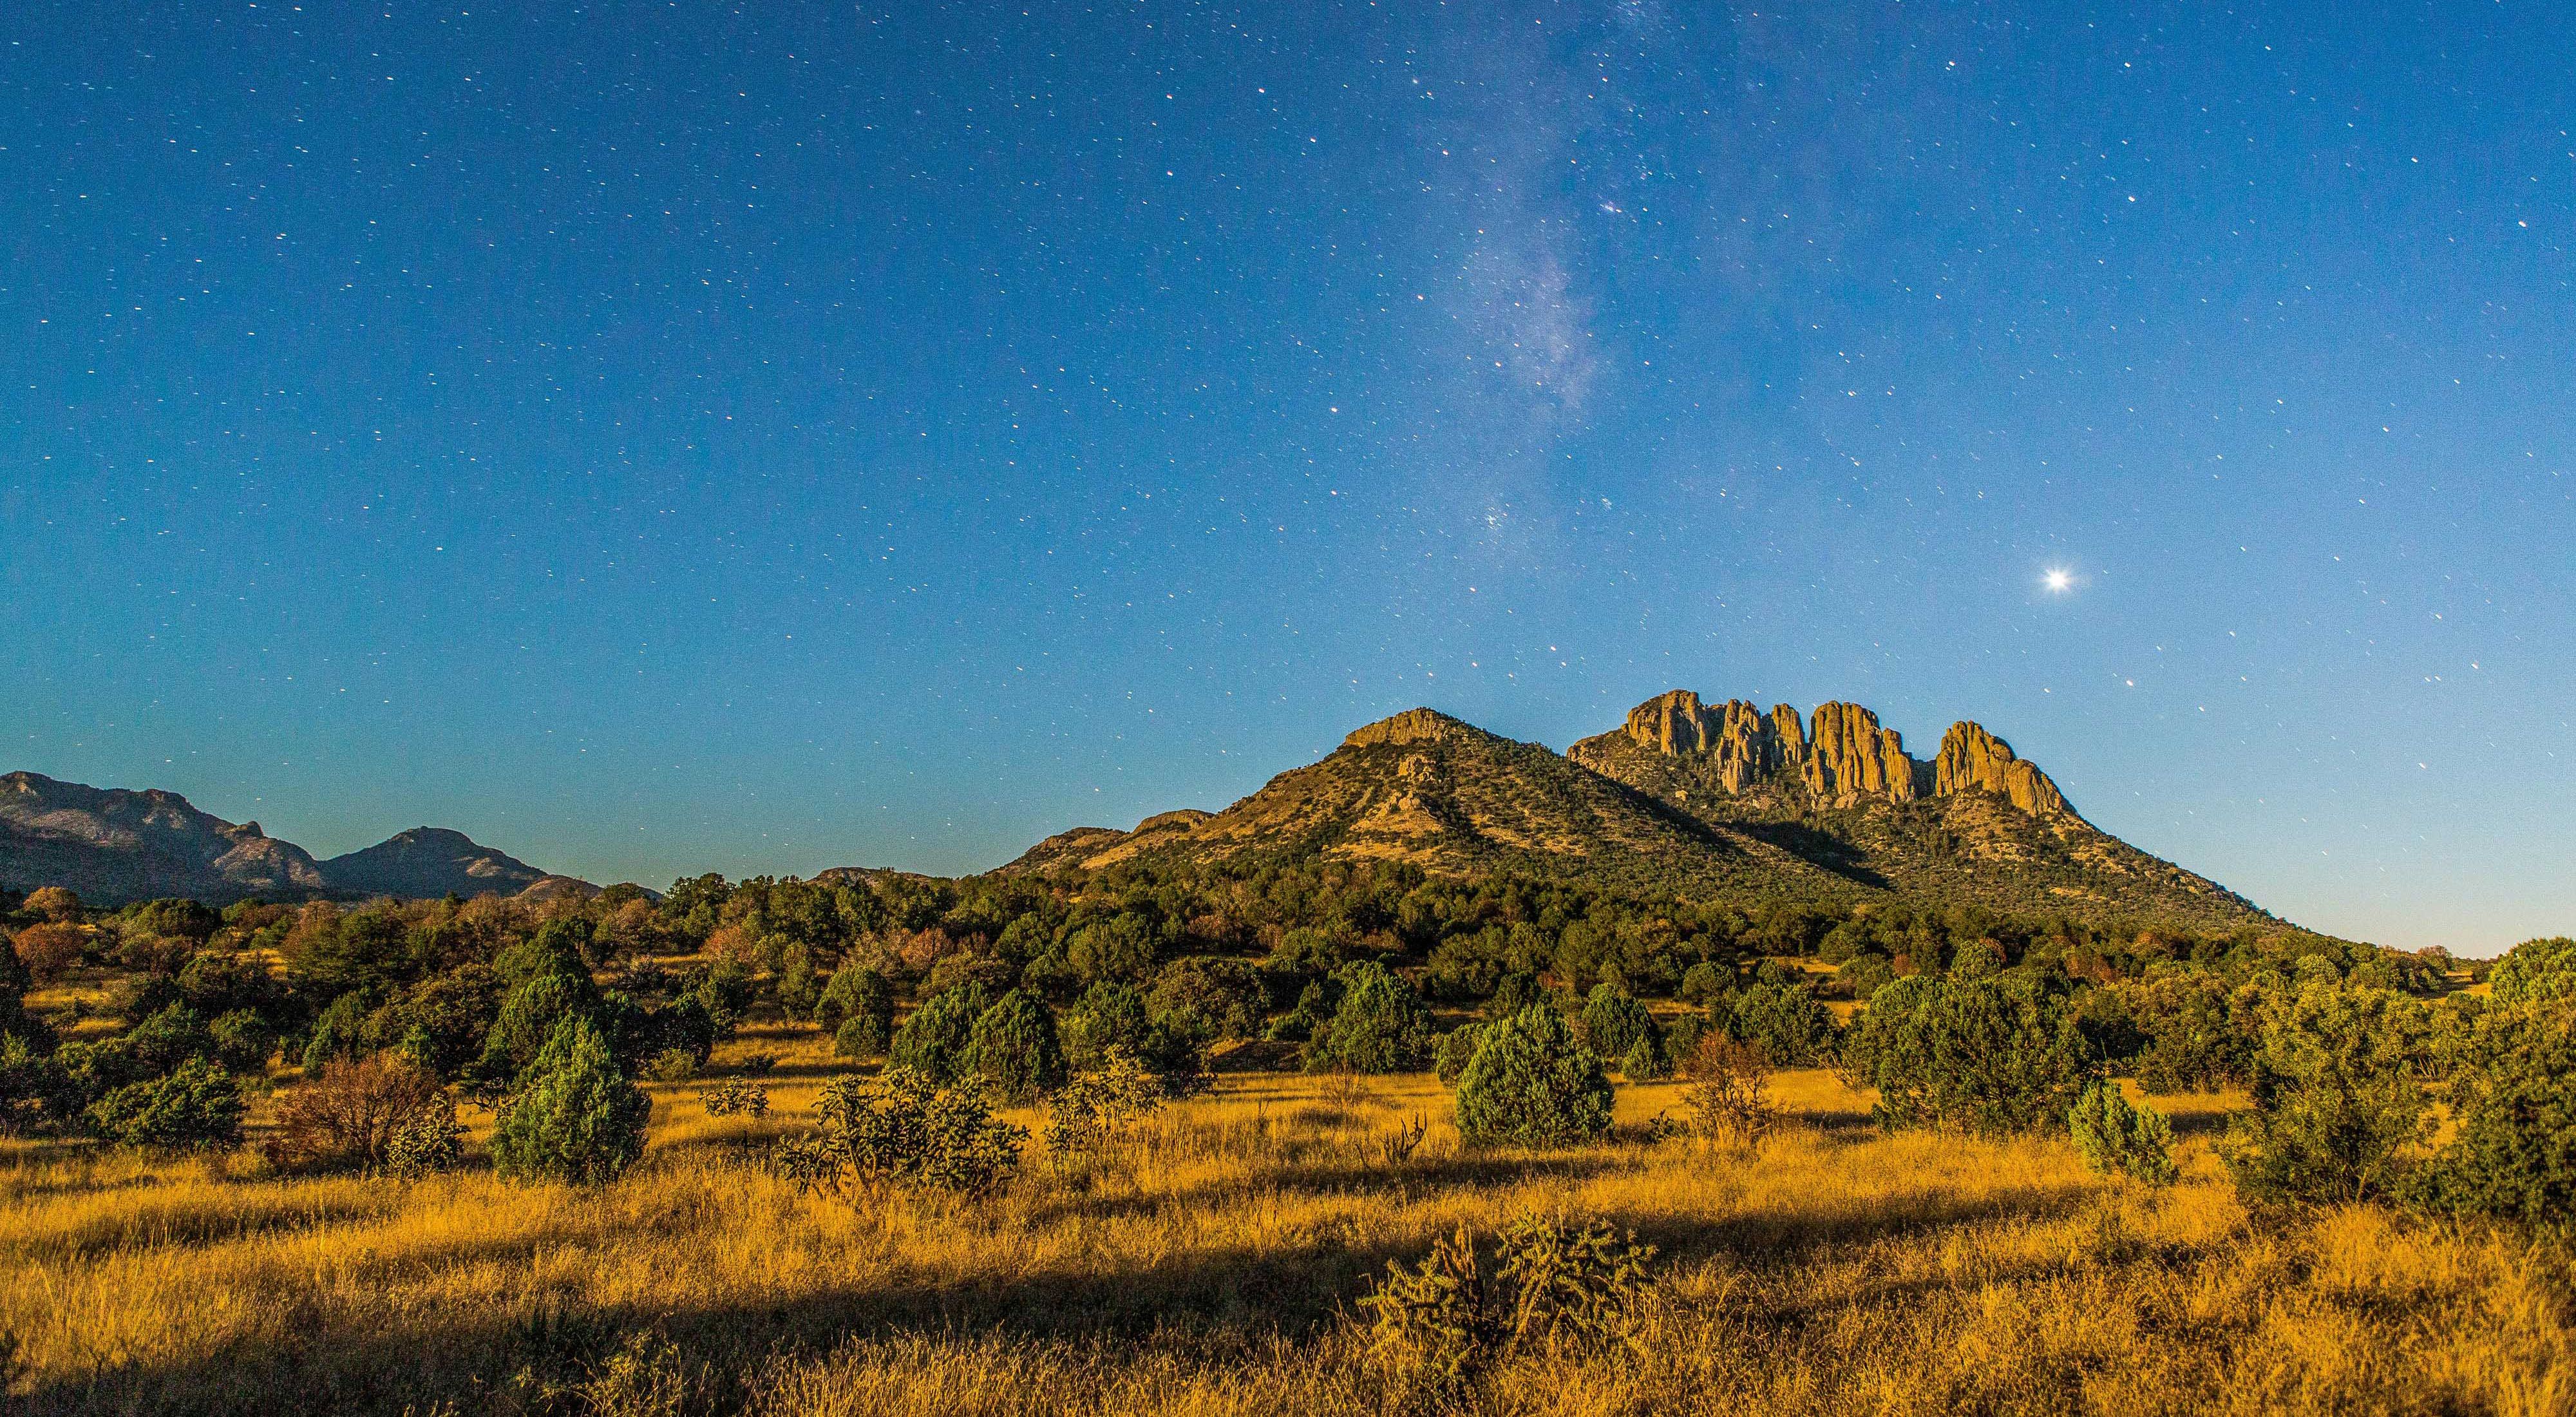 Yellow grasses lead to Sawtooth Mountain and upward to a starry early evening sky.